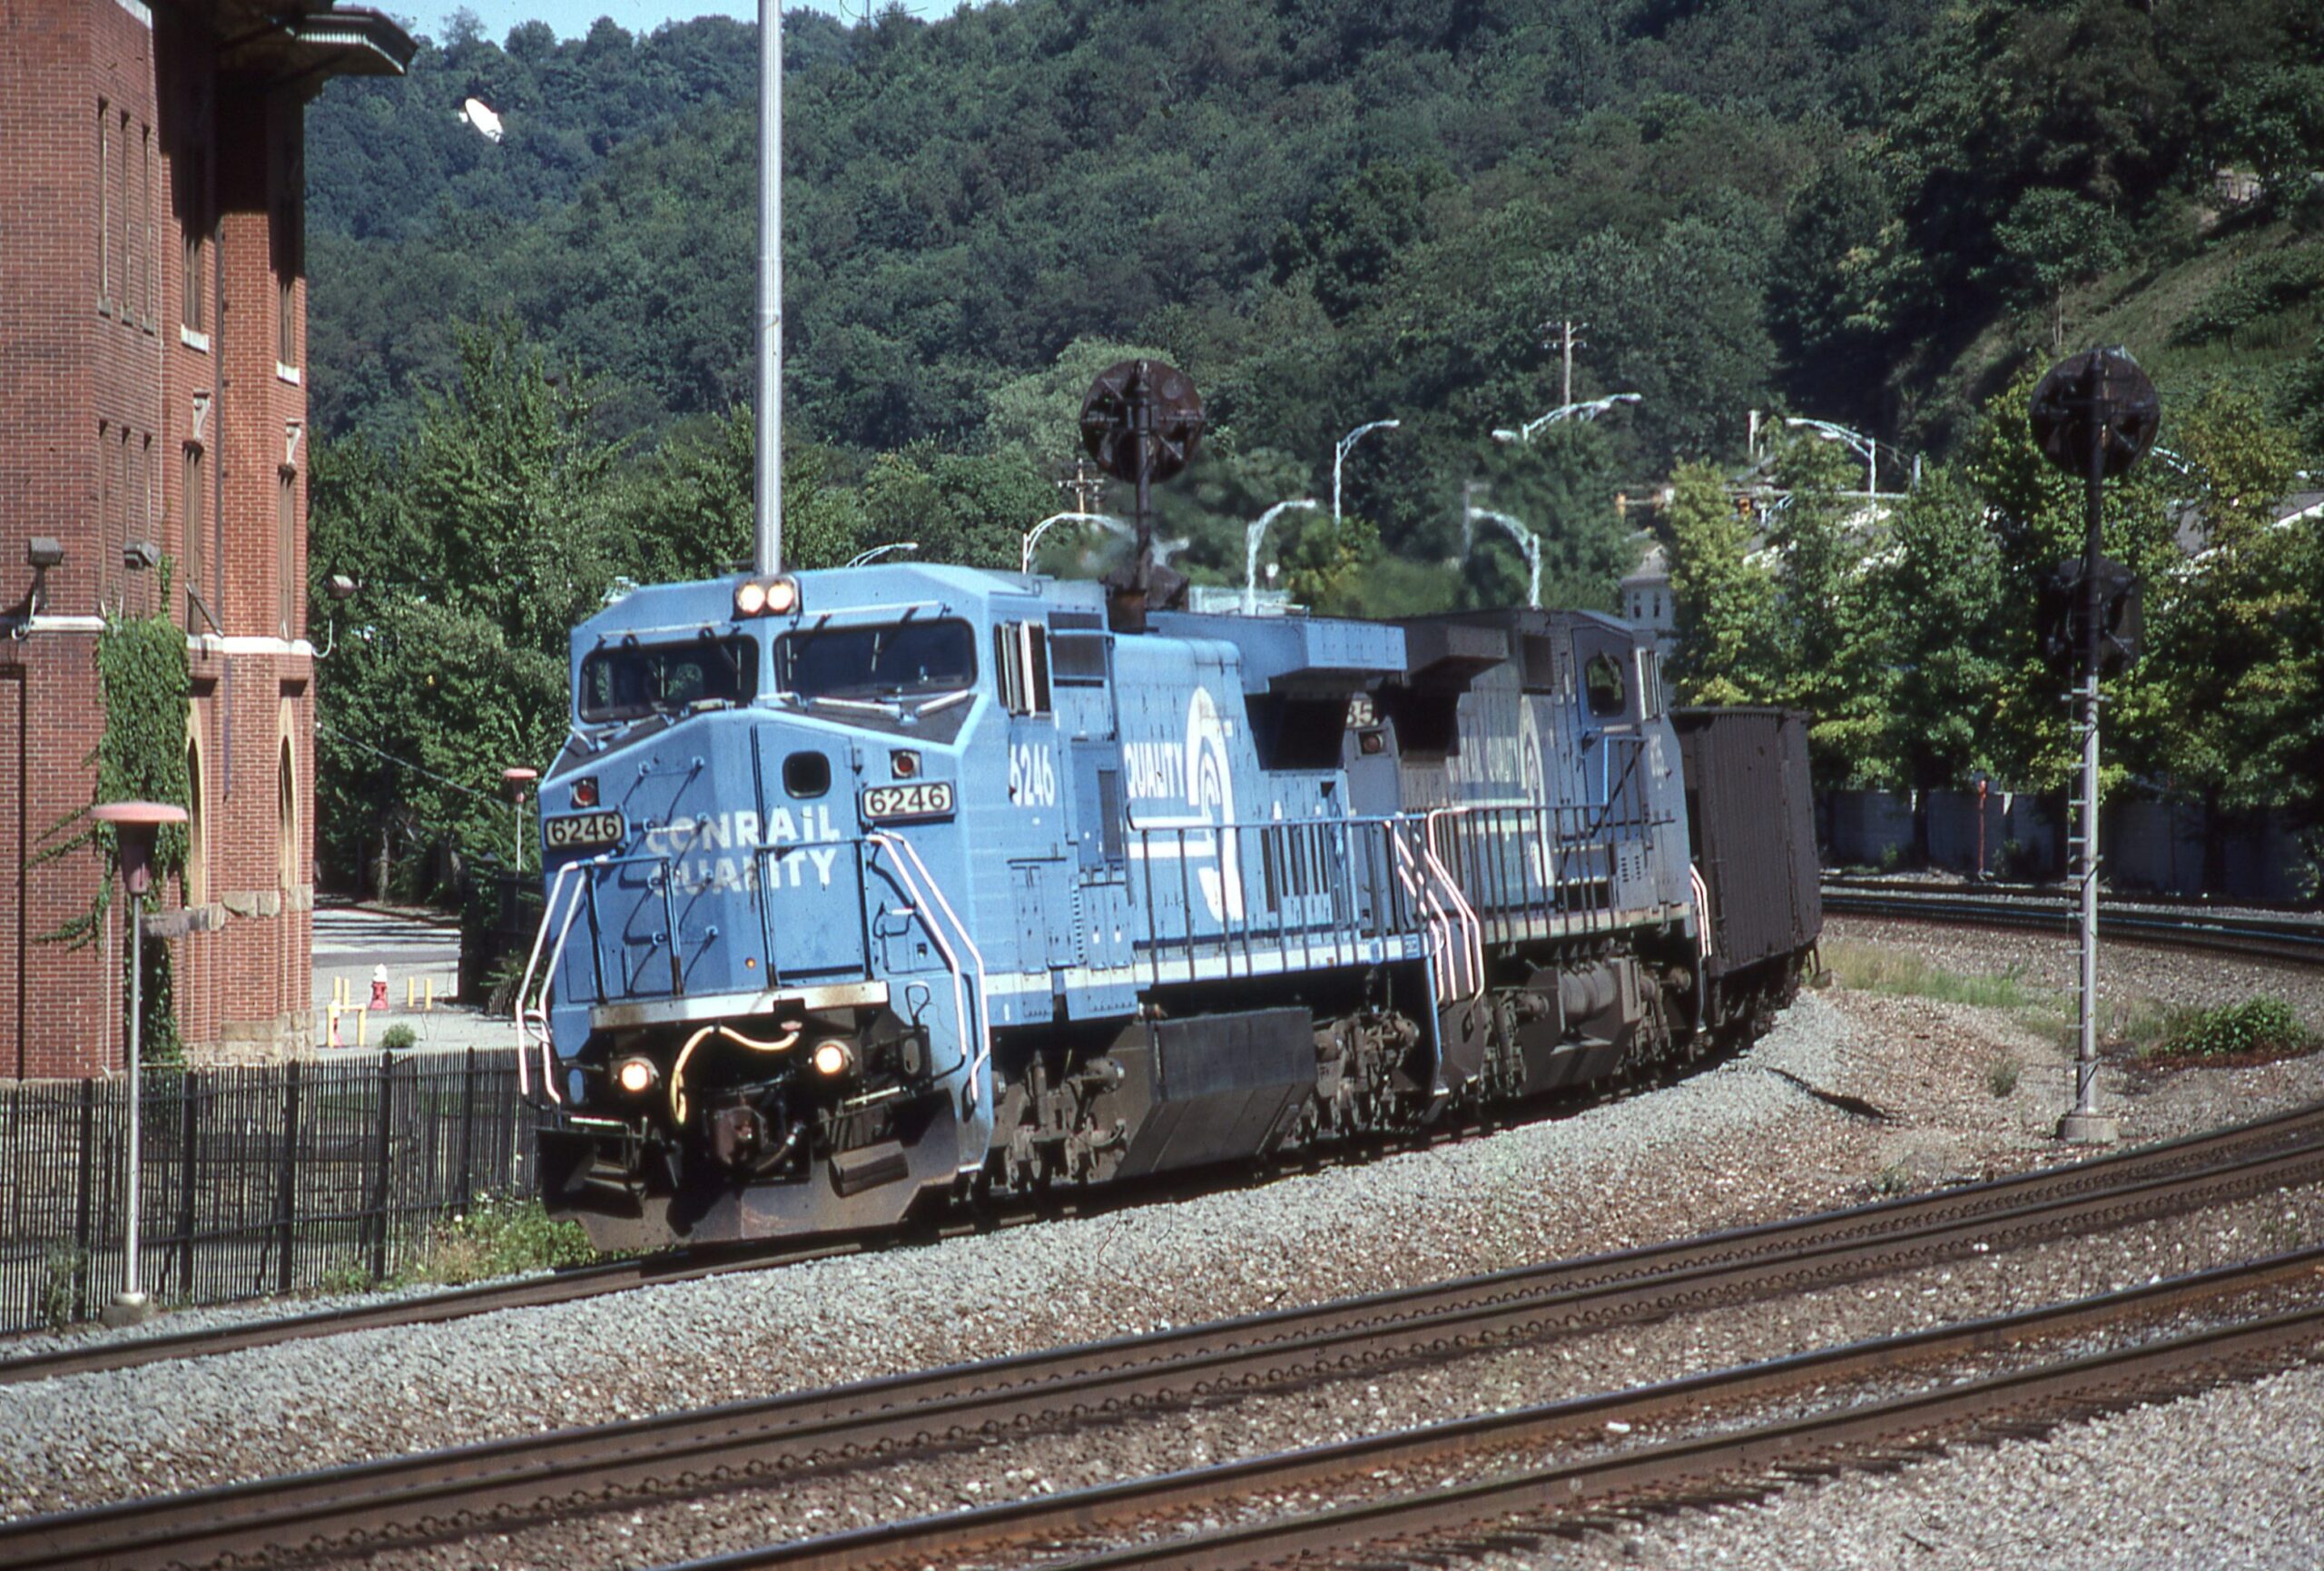 Conrail | Wilmerding, Pennsylvania | GE Class D8-40CW #6246 and #6135 diesel-electric locomotives | westbound empty hopper train | August 2, 1998 | Dick Flock photograph